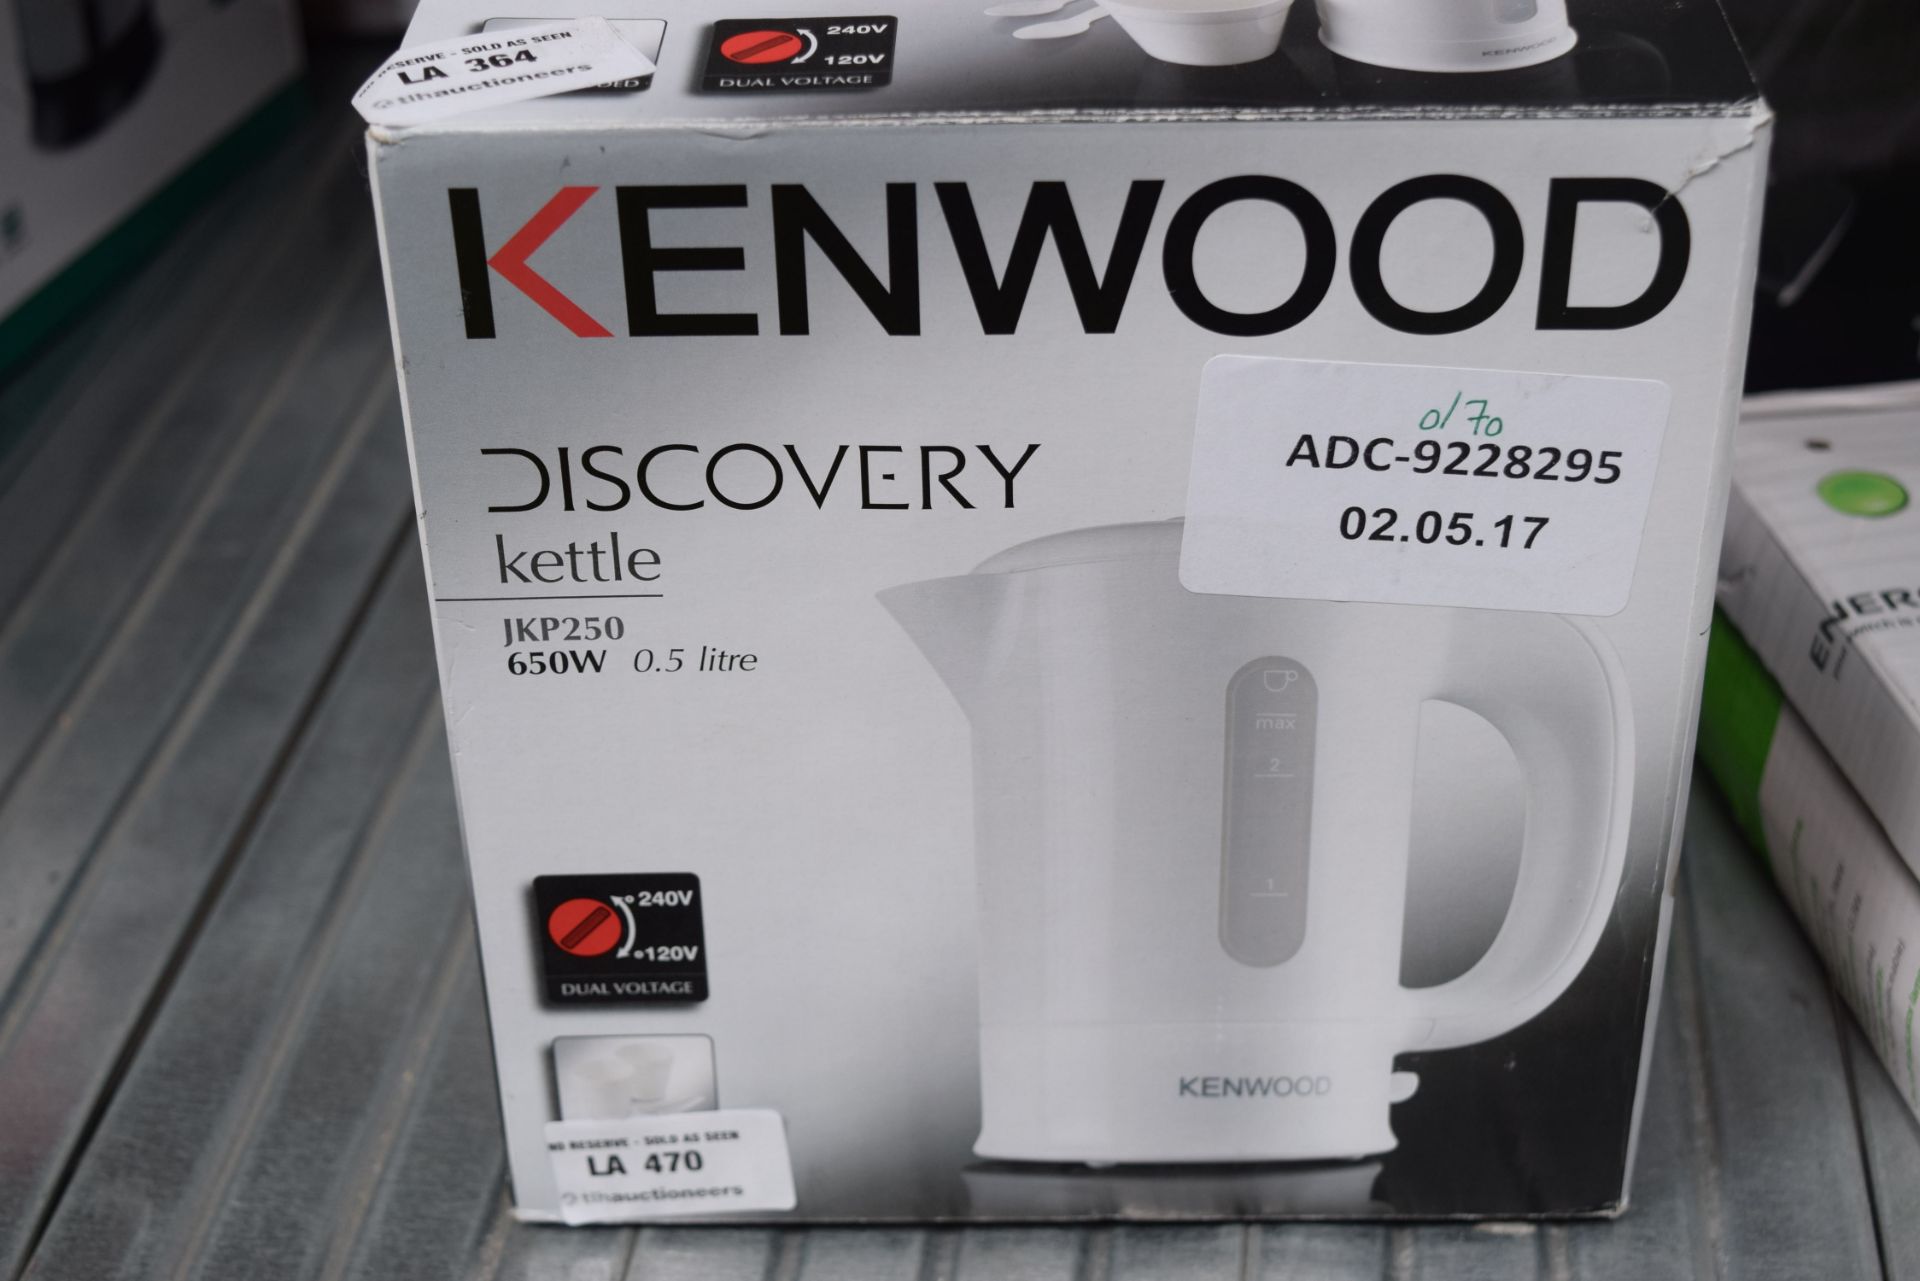 1 X KENWOOD DISCOVERY 0.5L KETTLE RRP £20 02.05.17